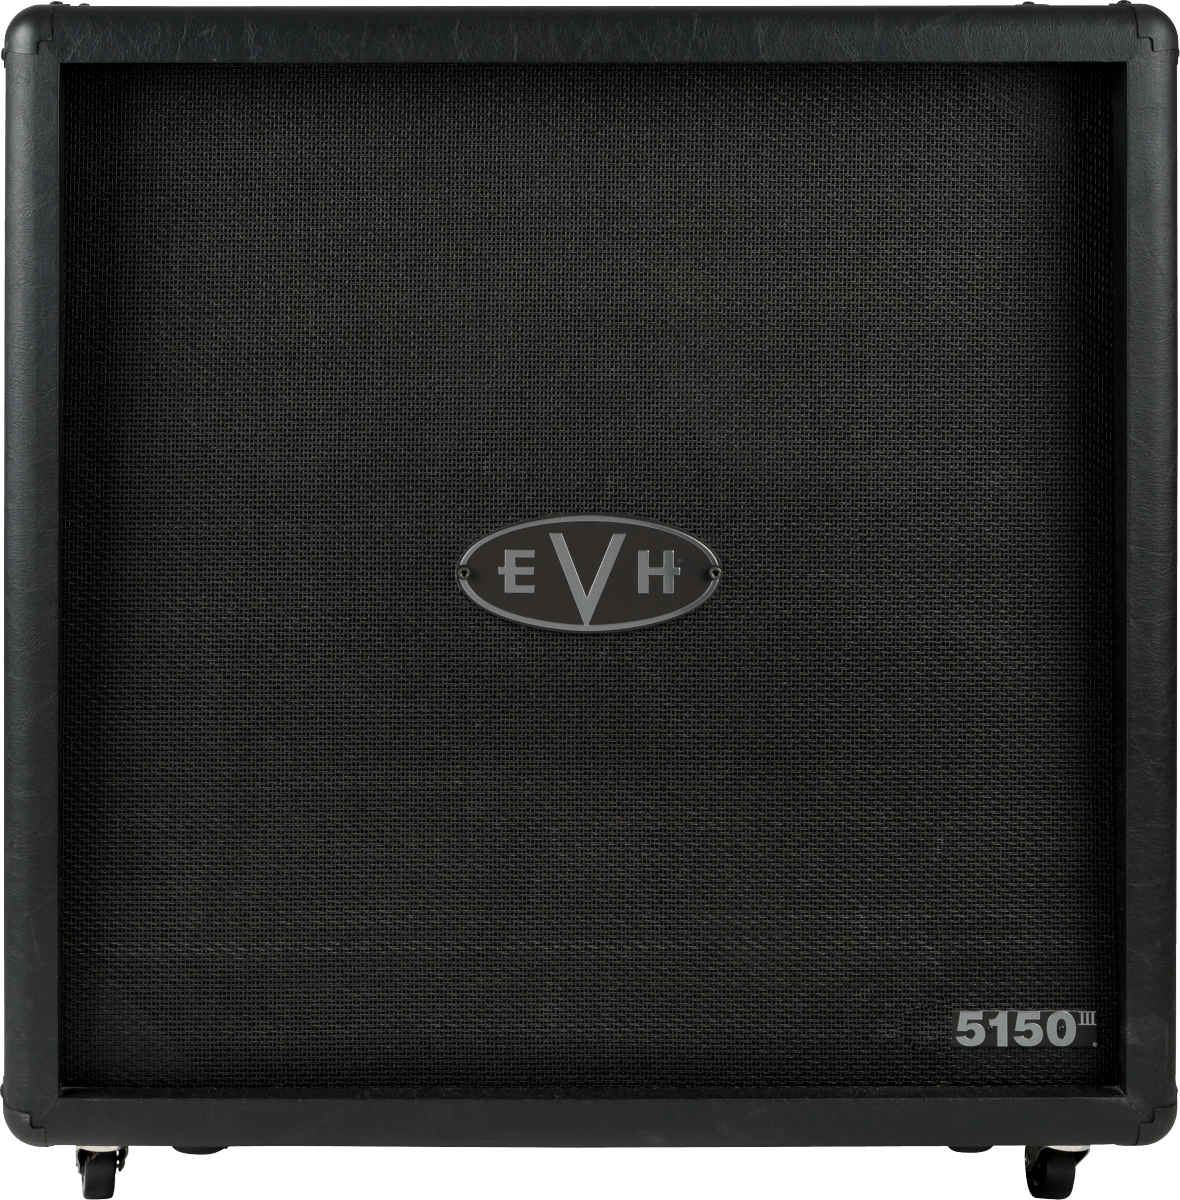 EVH 5150 III 4x12 Limited Edition Cabinet in Black Stealth